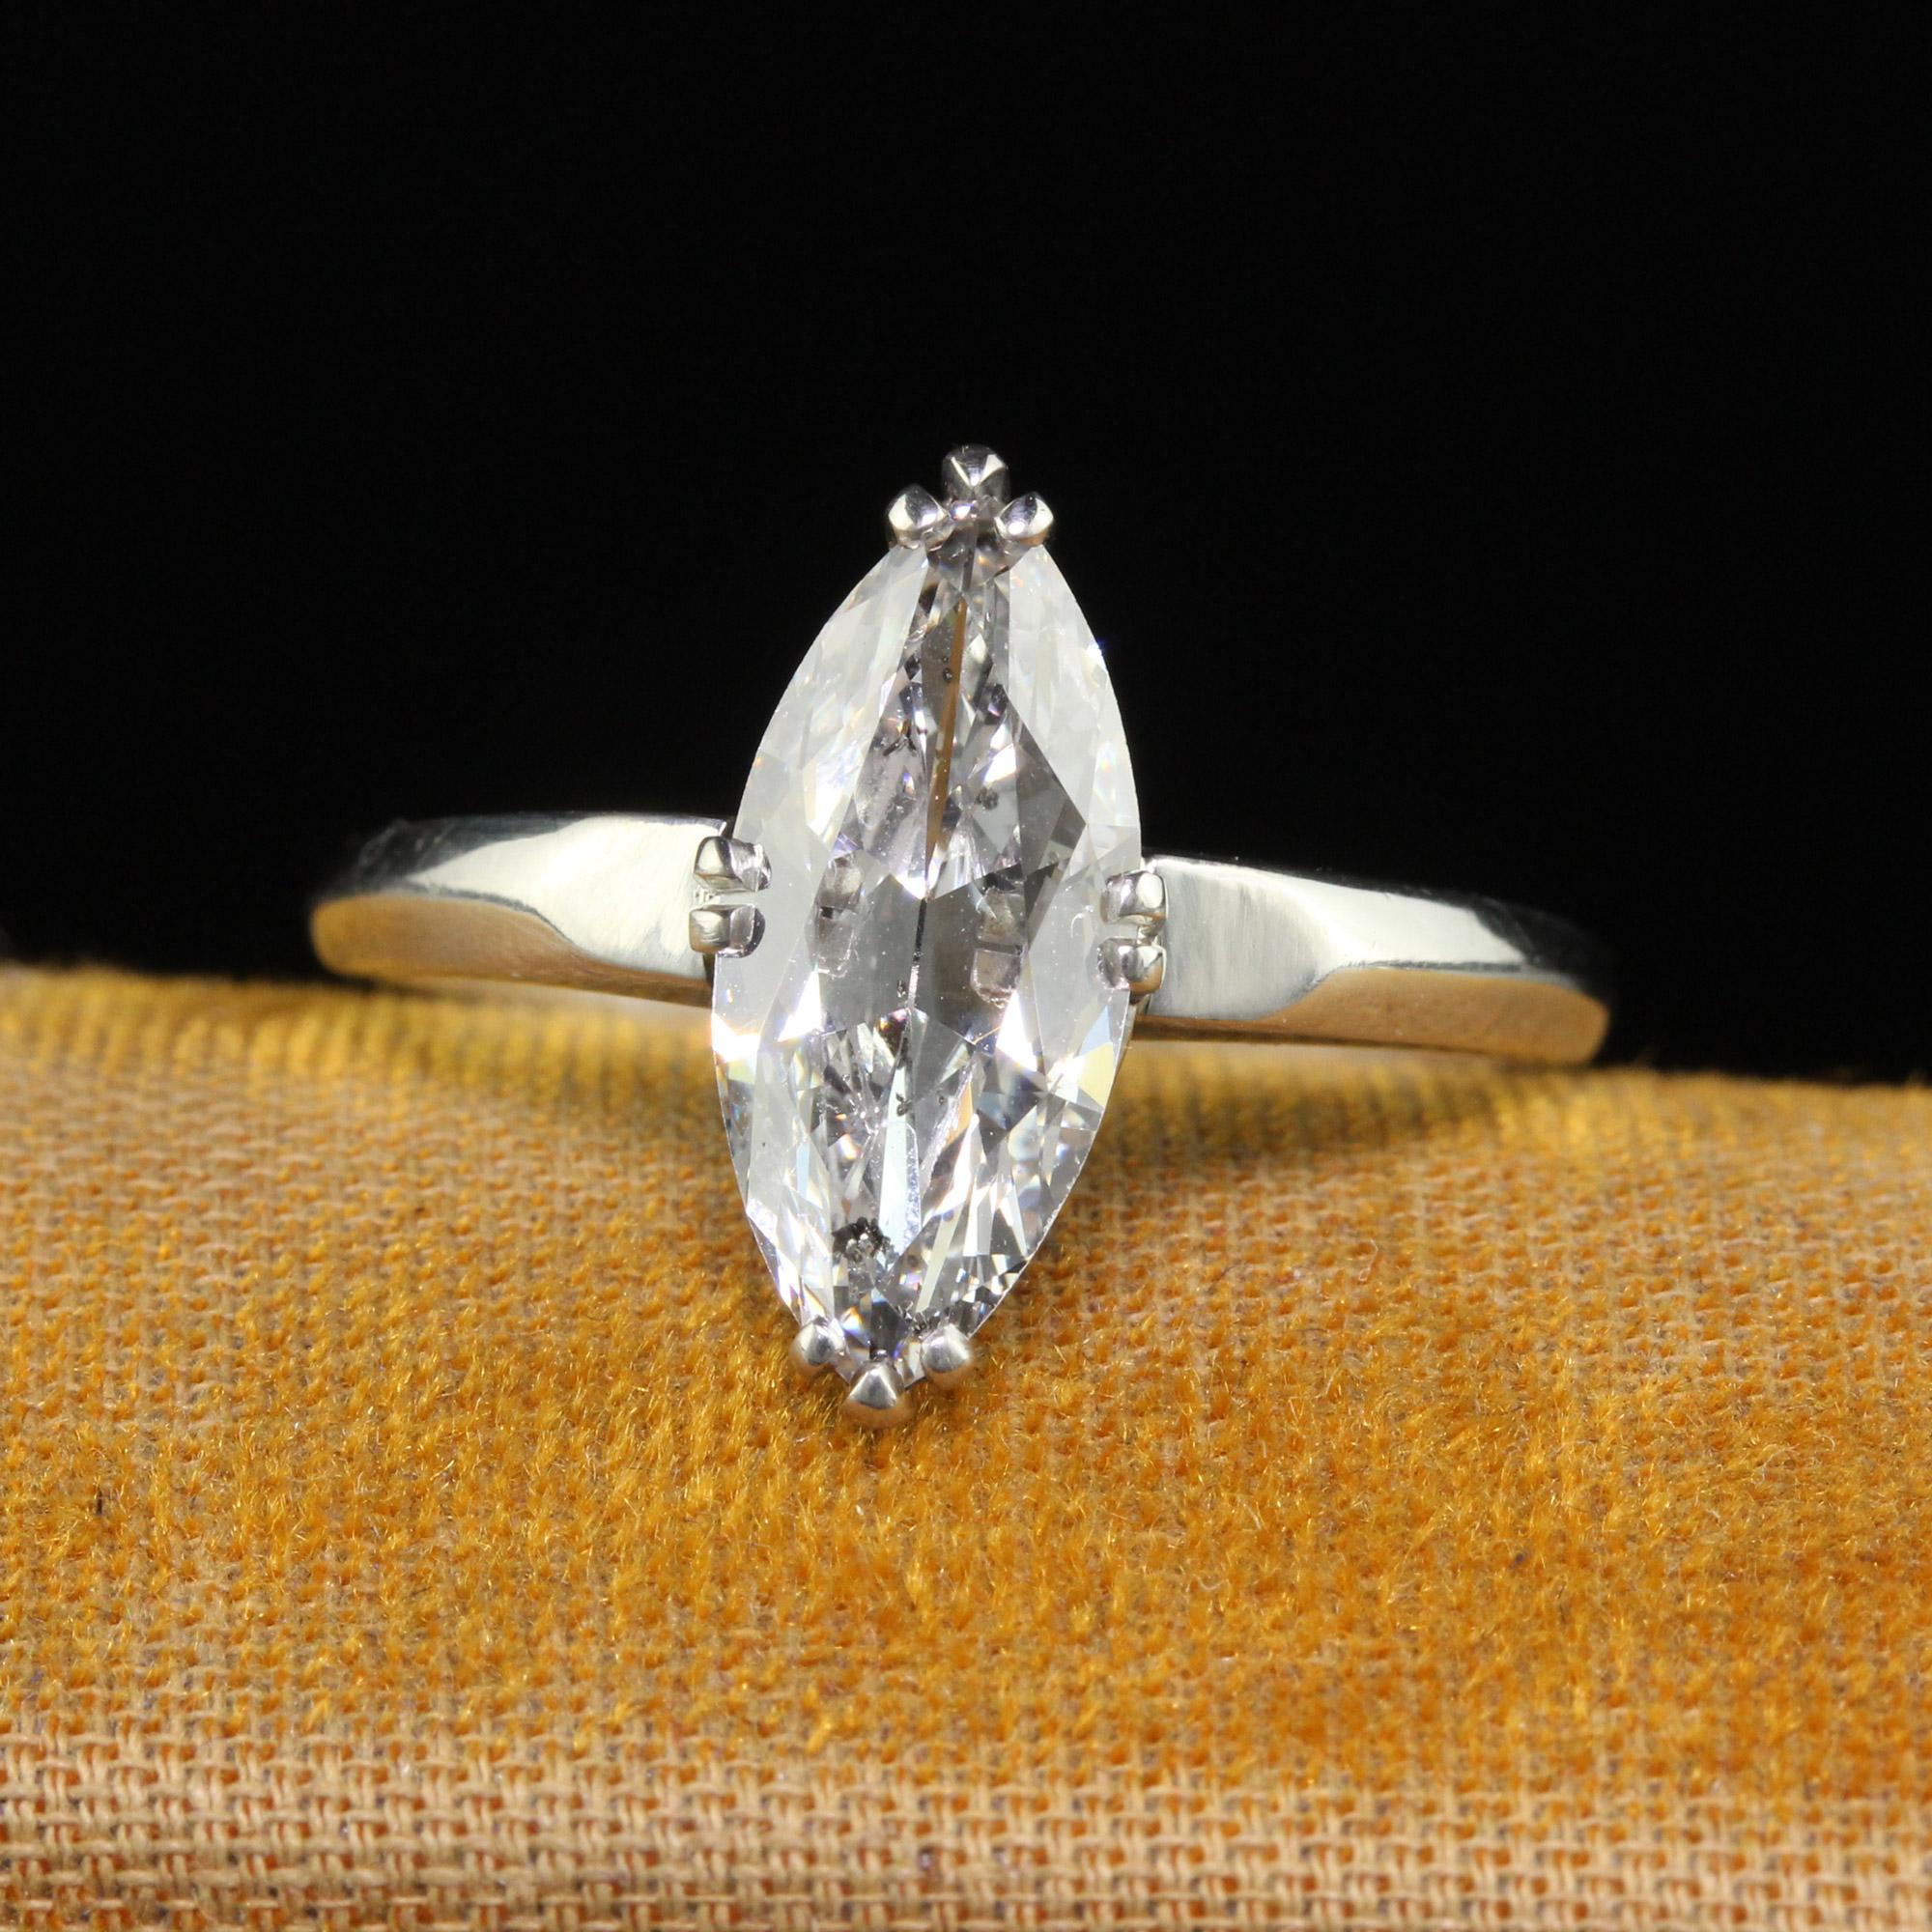 Beautiful Antique Art Deco Platinum Old Cut Marquise Diamond Engagement Ring - GIA. This gorgeous old cut marquise engagement ring is crafted in platinum. The center holds a beautiful old cut marquise diamond that has incredible sparkle and